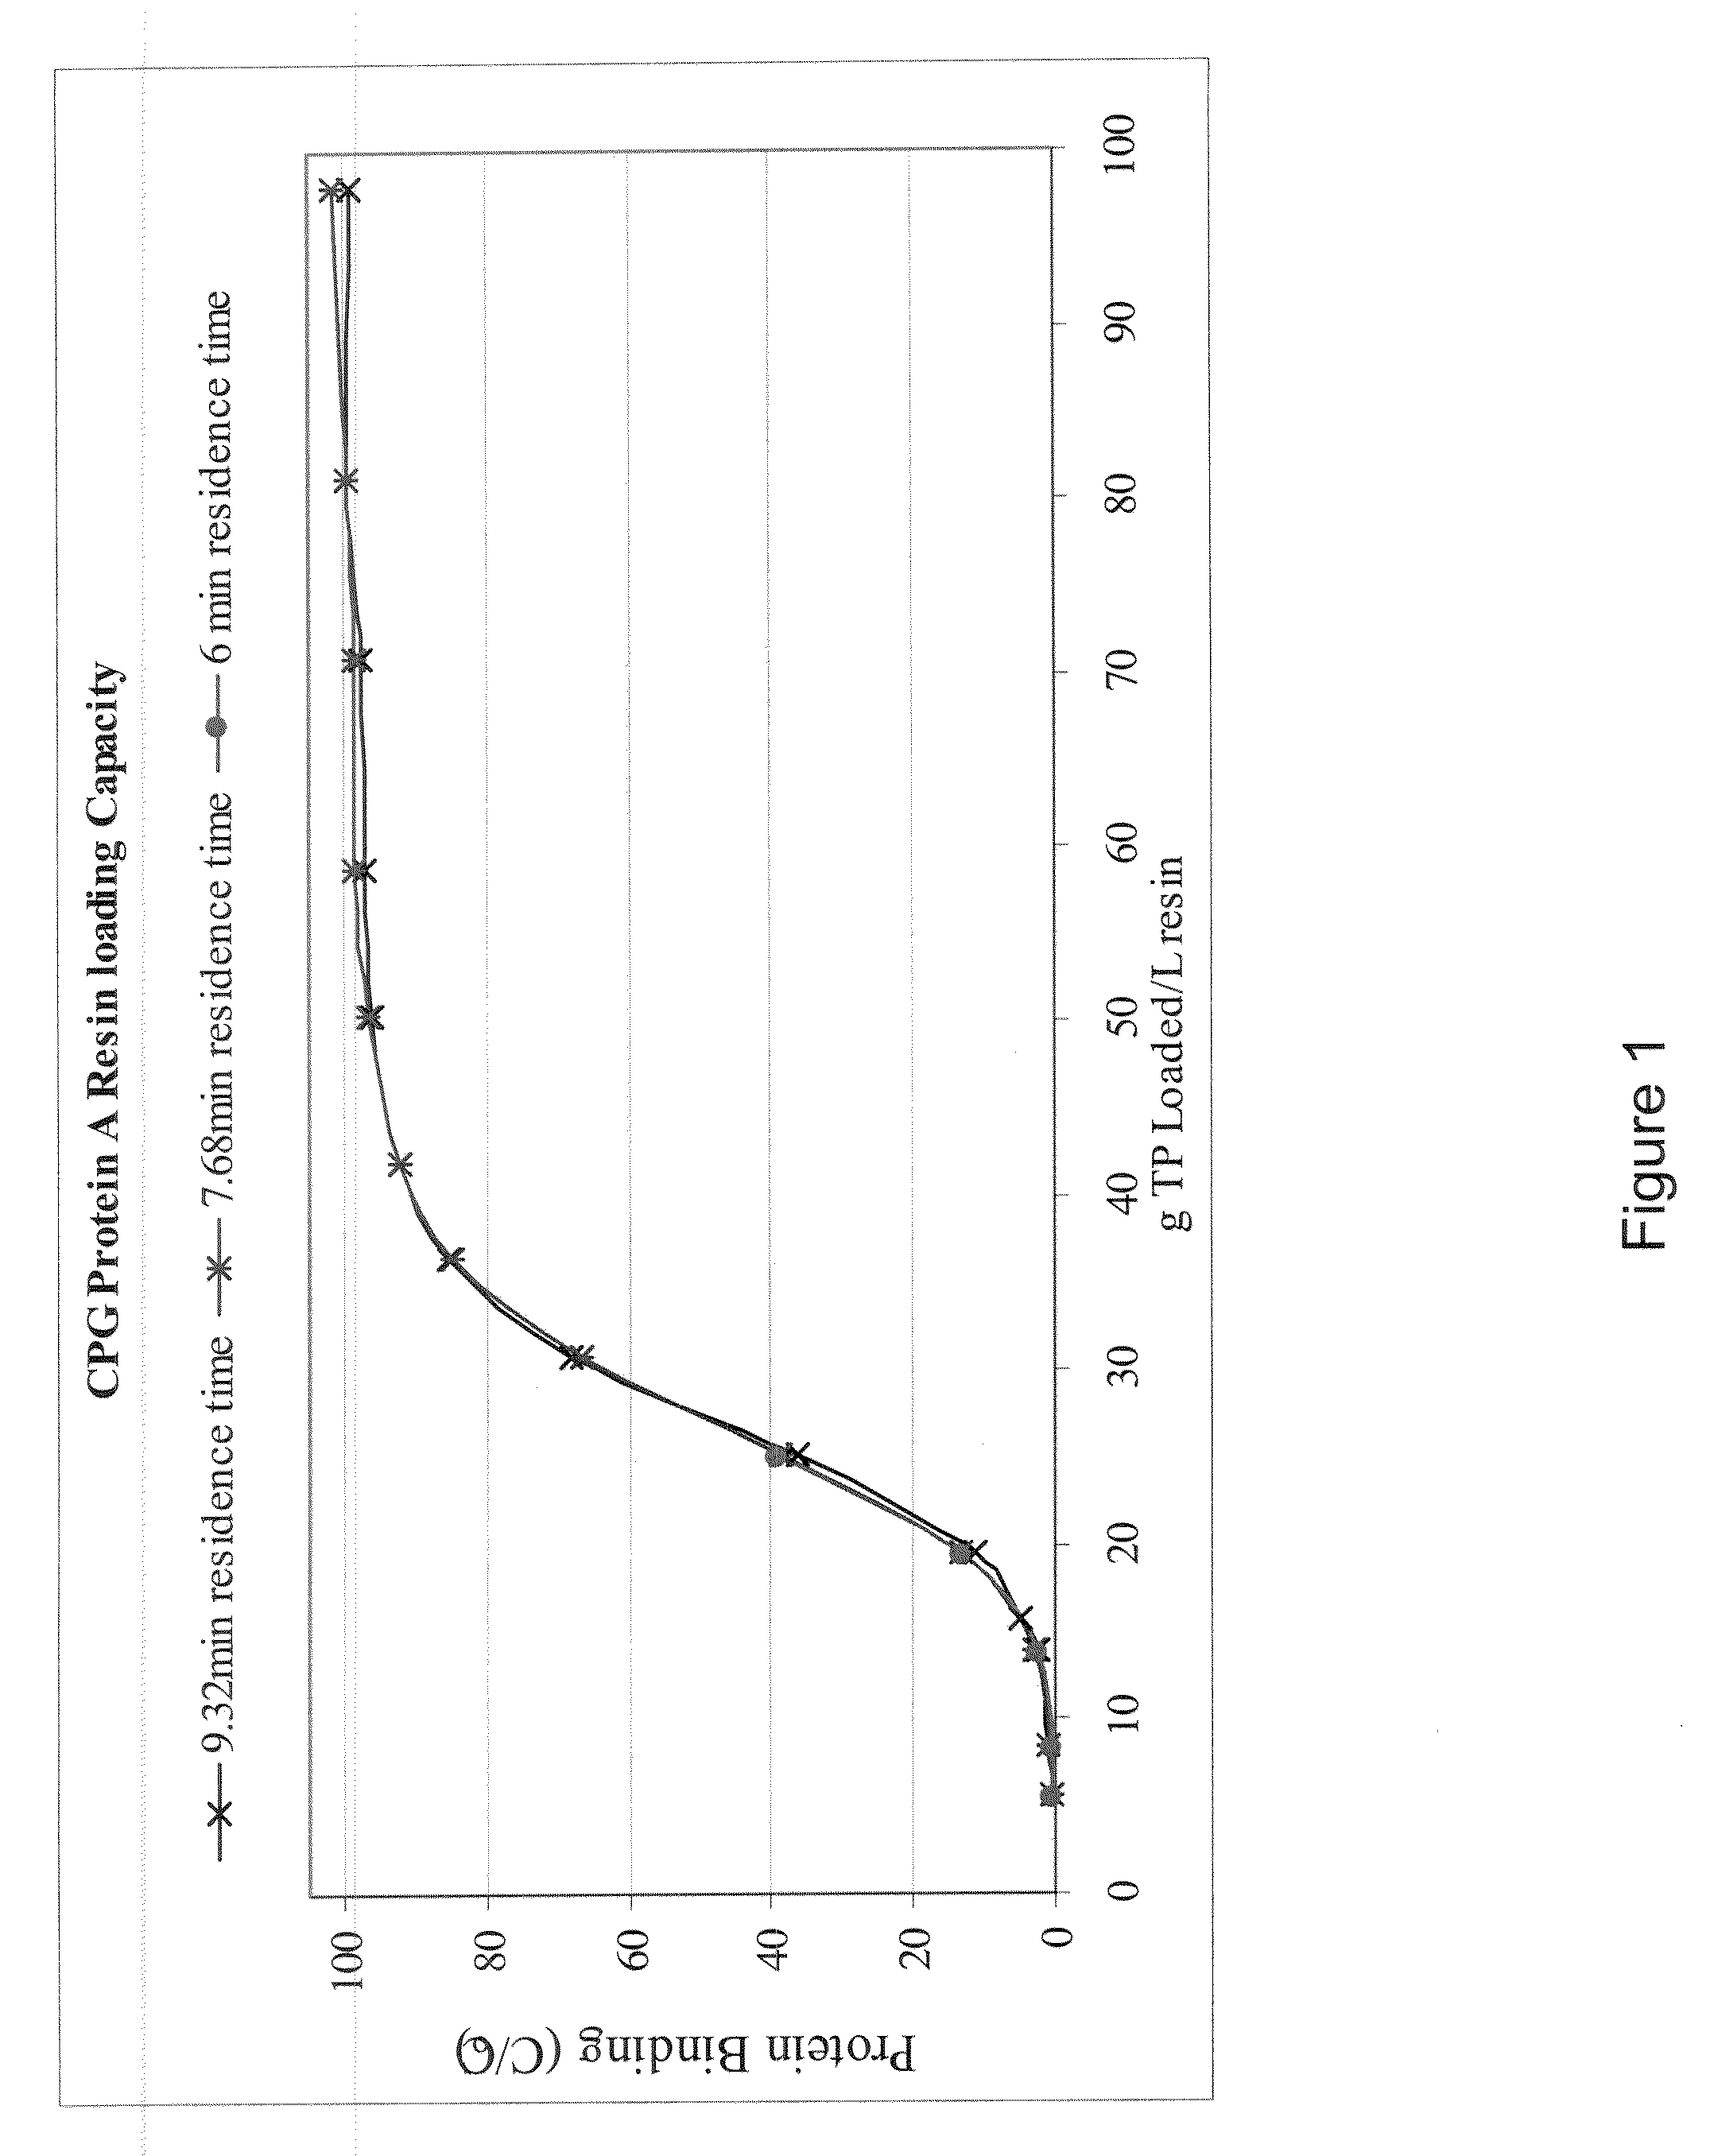 Capture purification processes for proteins expressed in a non-mammalian system